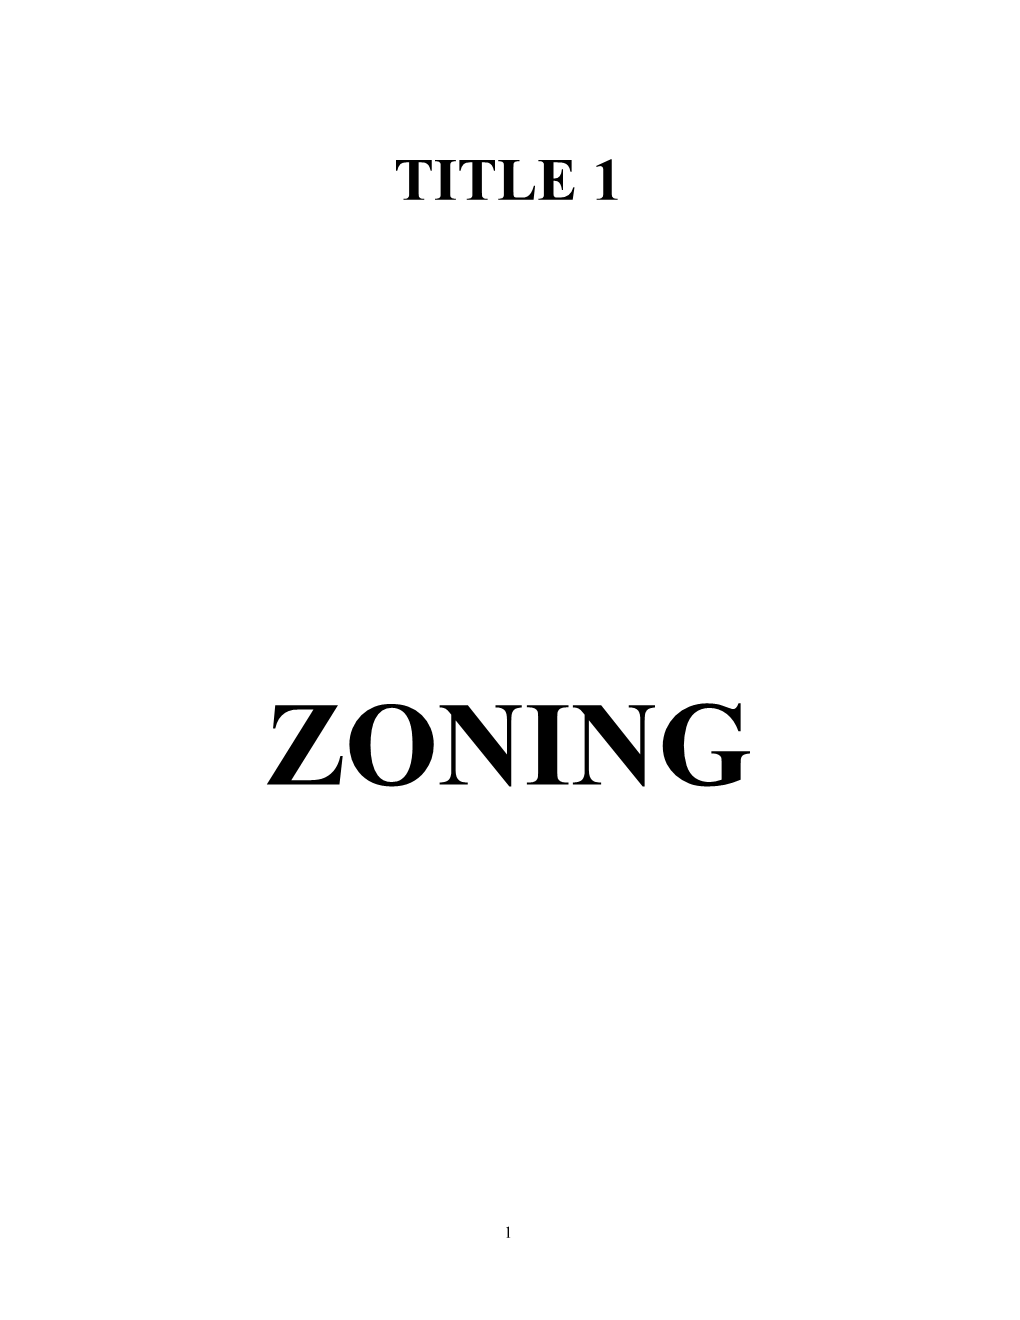 Zoning Article 1